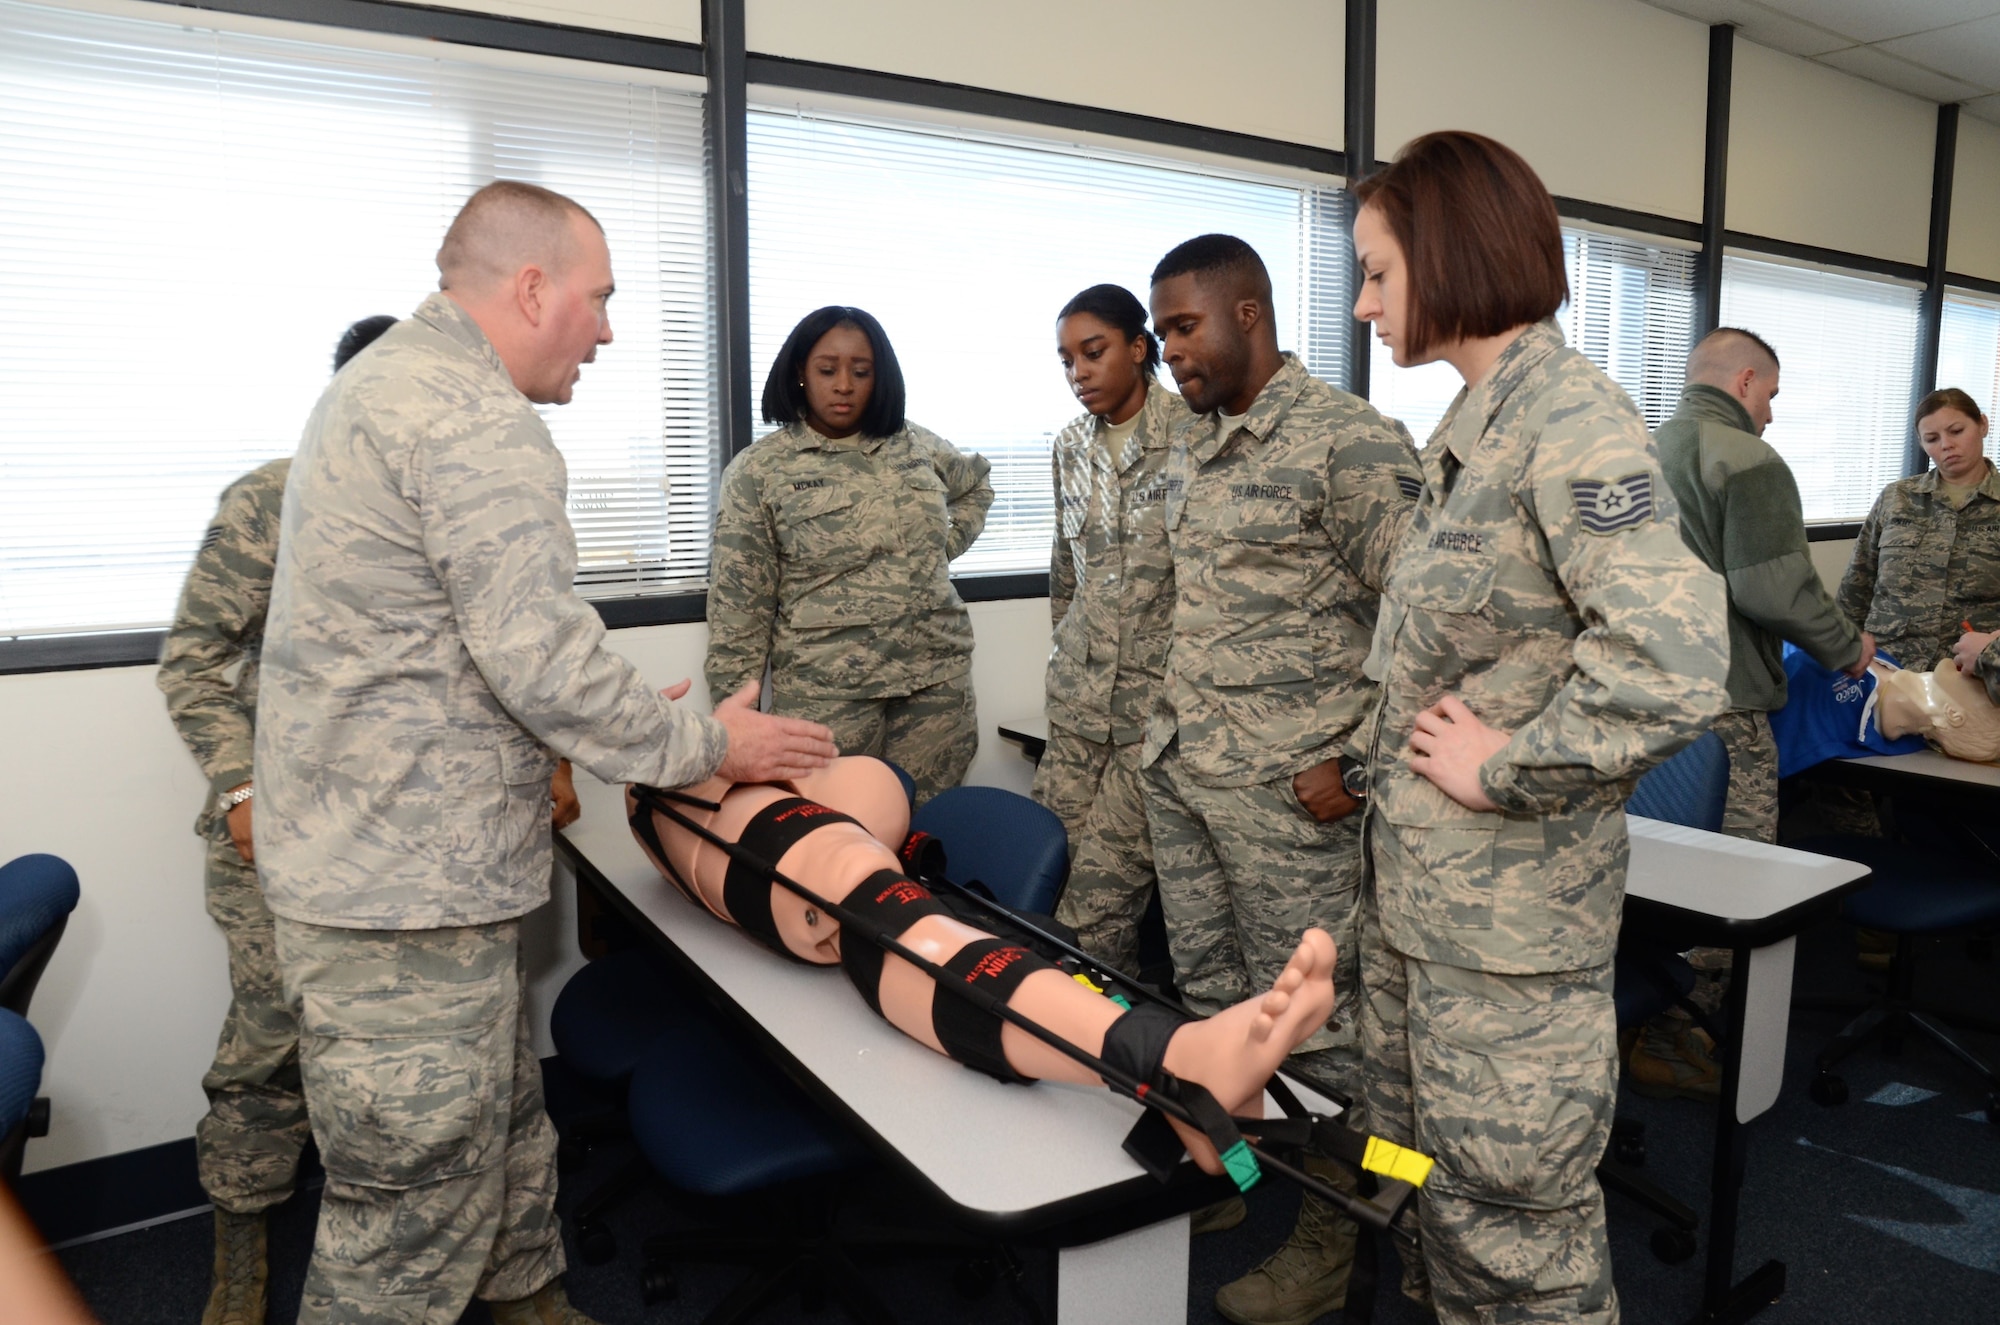 Medical Personnel from Air National Guard units across the country demonstrate their patient assessment skills during a Pre-Hospital Trauma Life Support course at Nellis Air Force Base, Nev., Jan. 27, 2018.